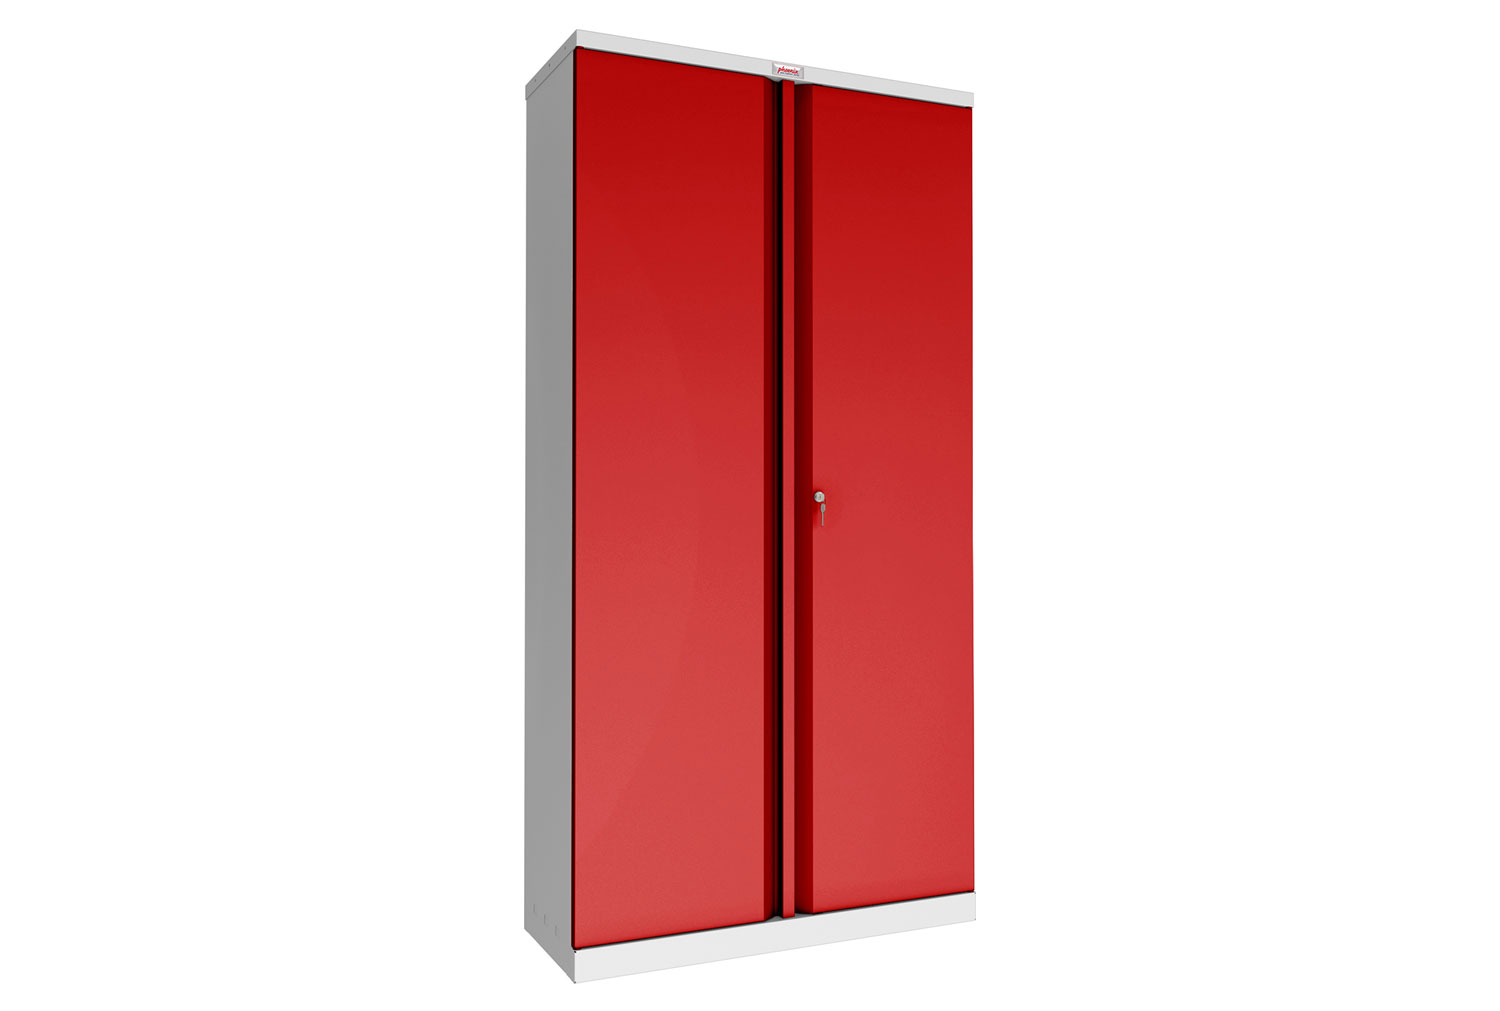 Phoenix SCL Steel Storage Office Cupboards With Key Lock, 4 Shelf - 92wx37dx183h (cm), Red, Express Delivery